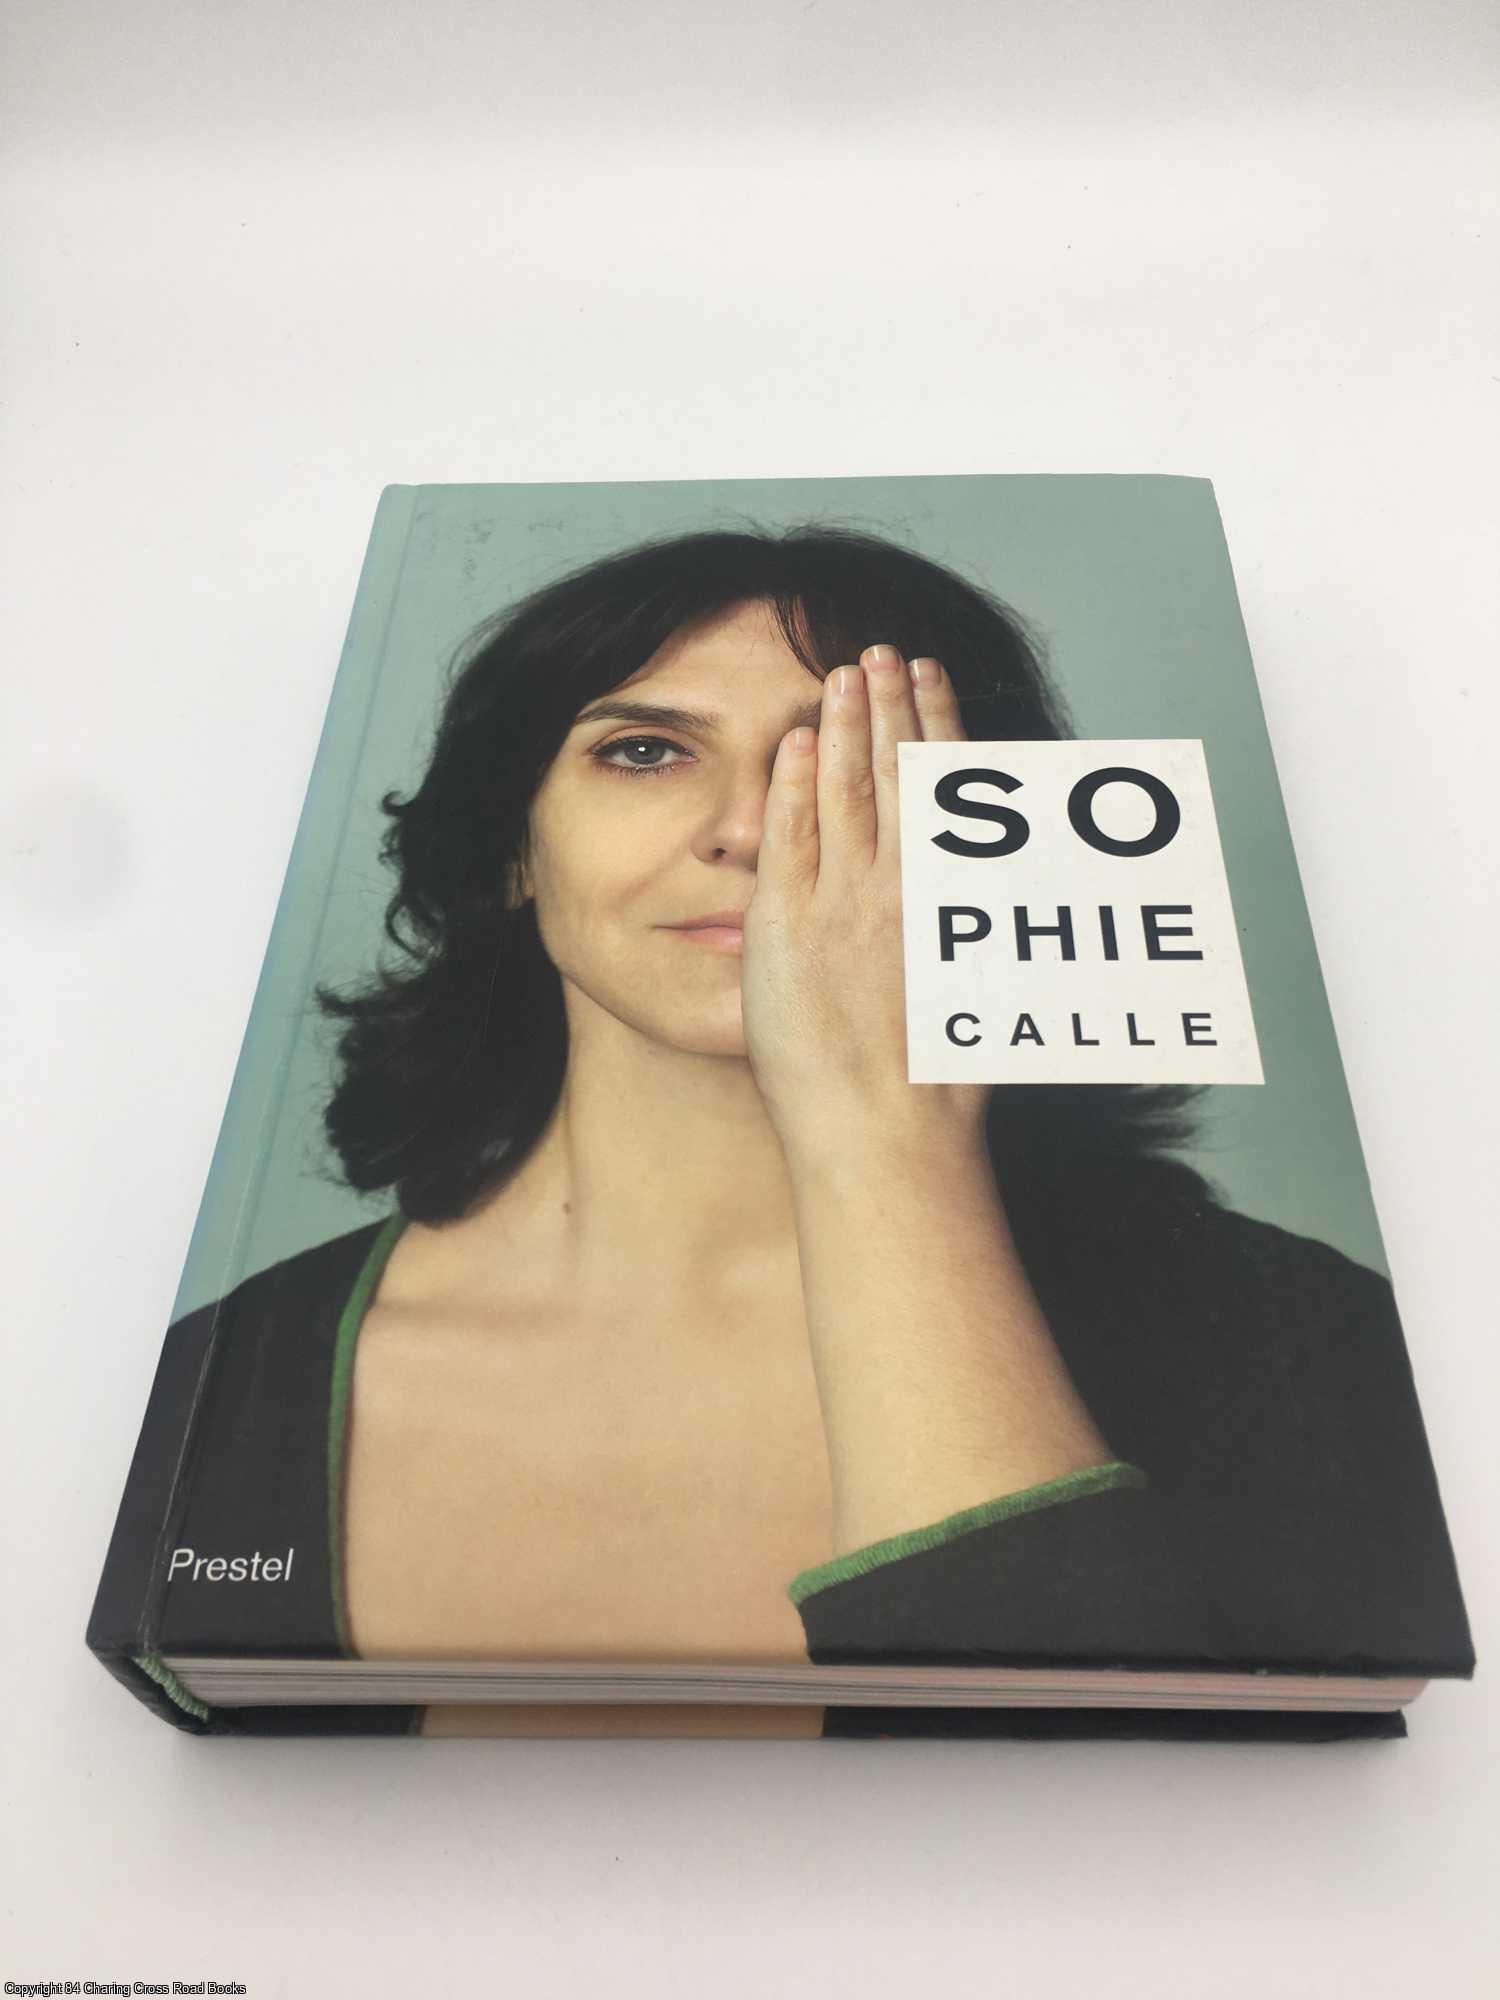 Sophie Calle: Did you see me?: M'as Tu Vue by Sophie Calle on 84 Charing  Cross Rare Books